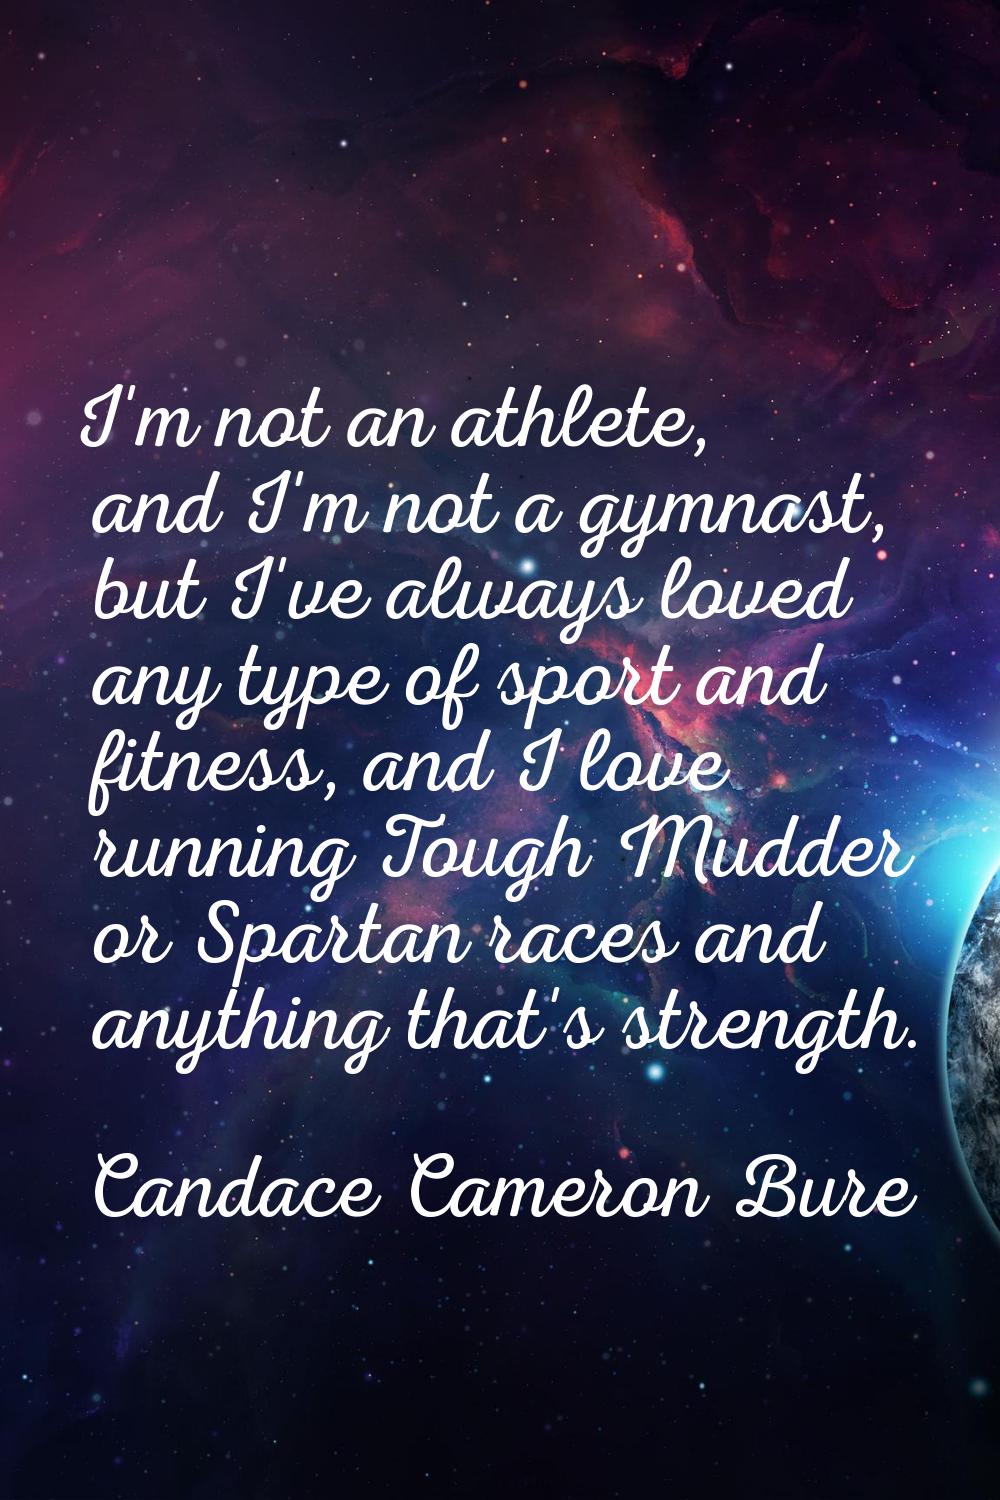 I'm not an athlete, and I'm not a gymnast, but I've always loved any type of sport and fitness, and